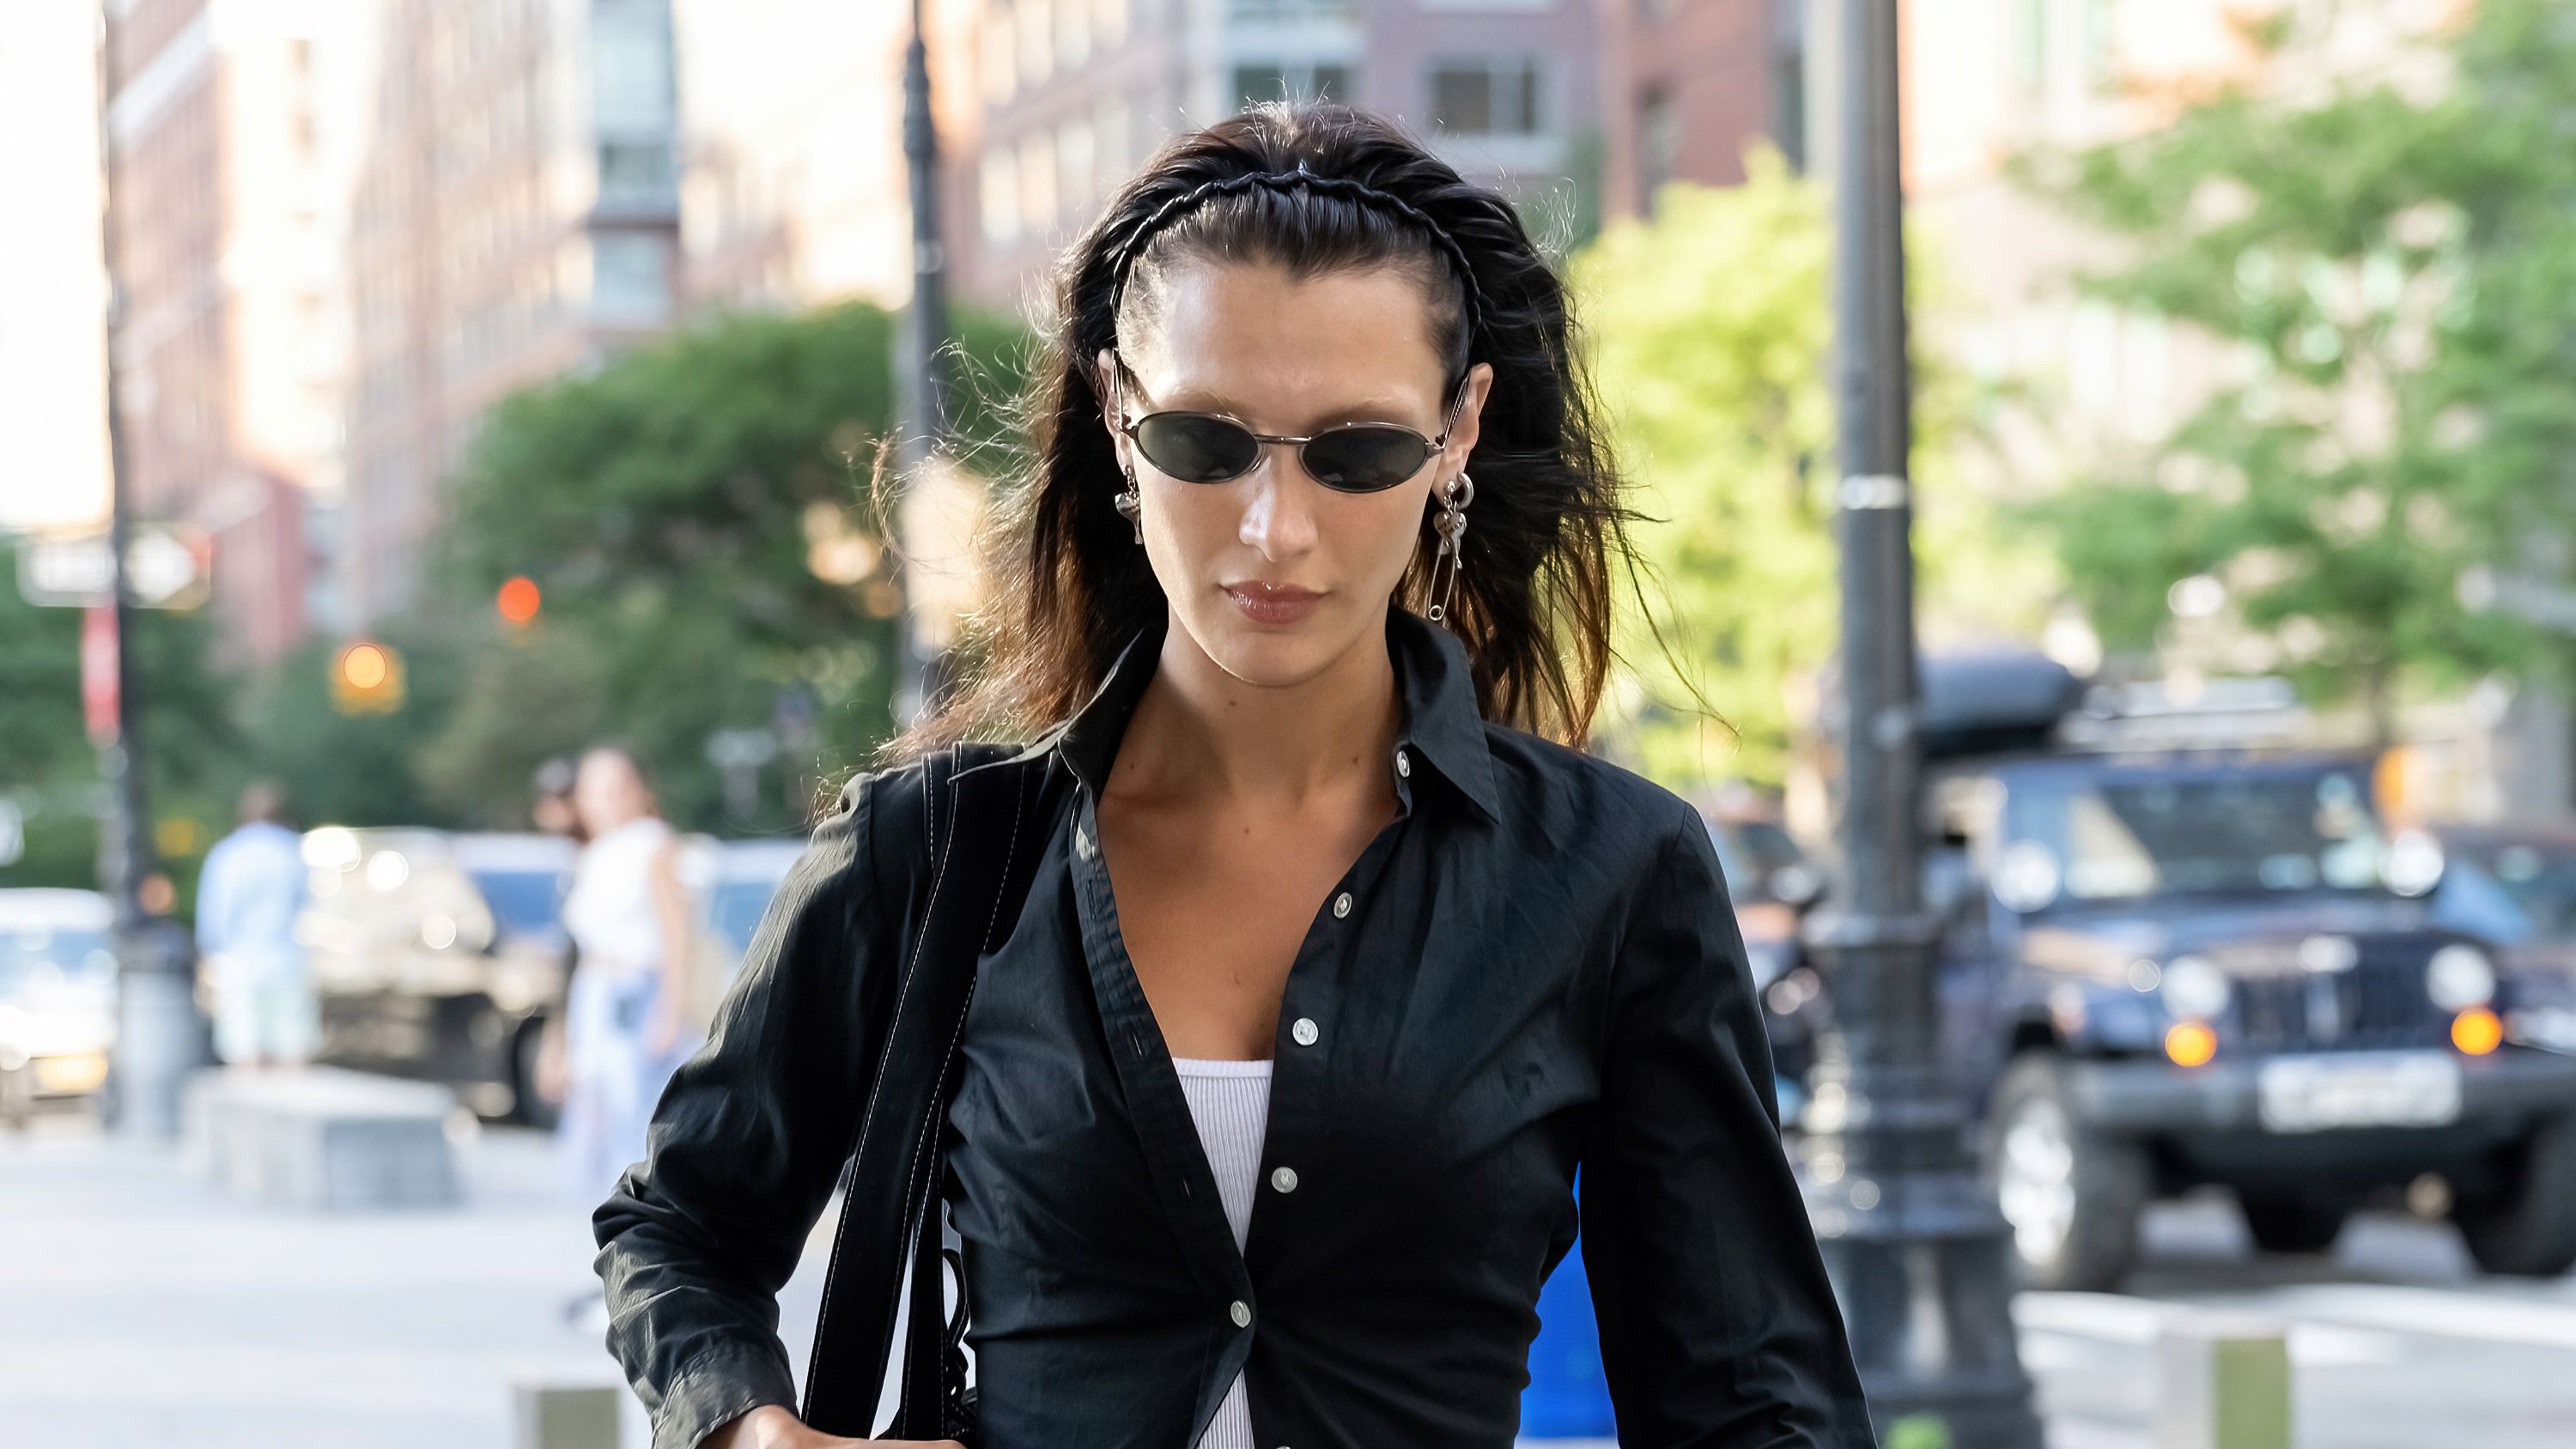 Bella Hadid goes vintage shopping in a super quirky look